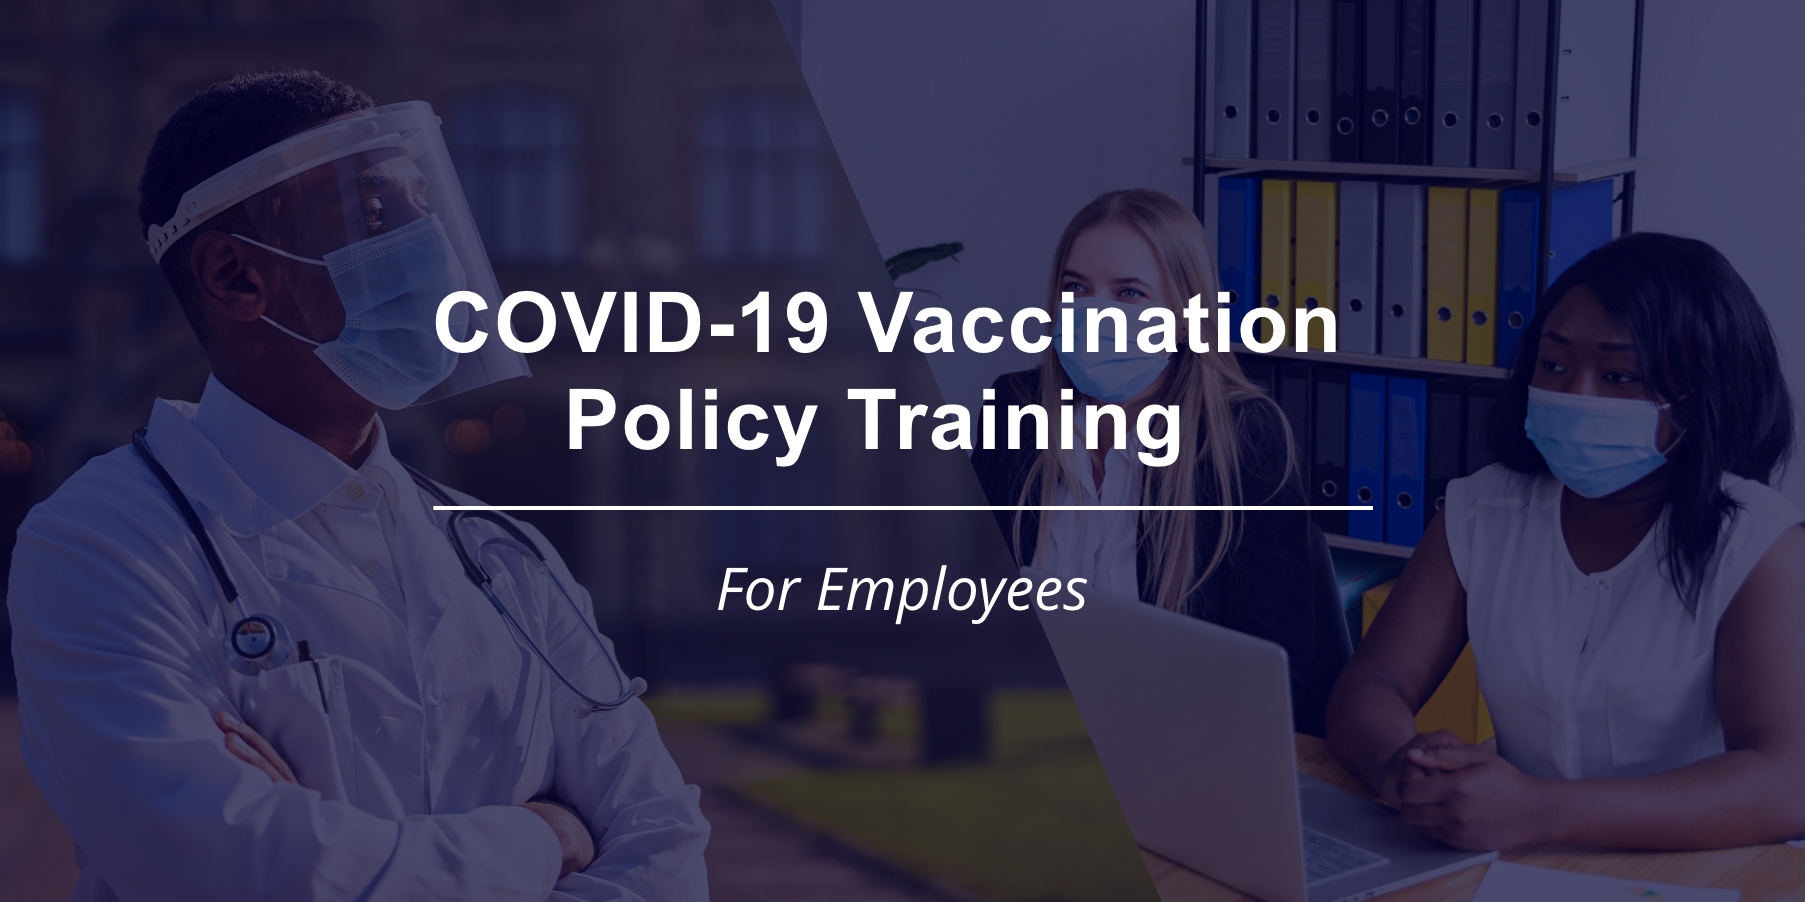 Poster for COVID-19 Vaccination Policy Training for Employees displaying the title of the event, a photo of a male medical professional wearing a face mask and face shield and two female office workers wearing face masks.